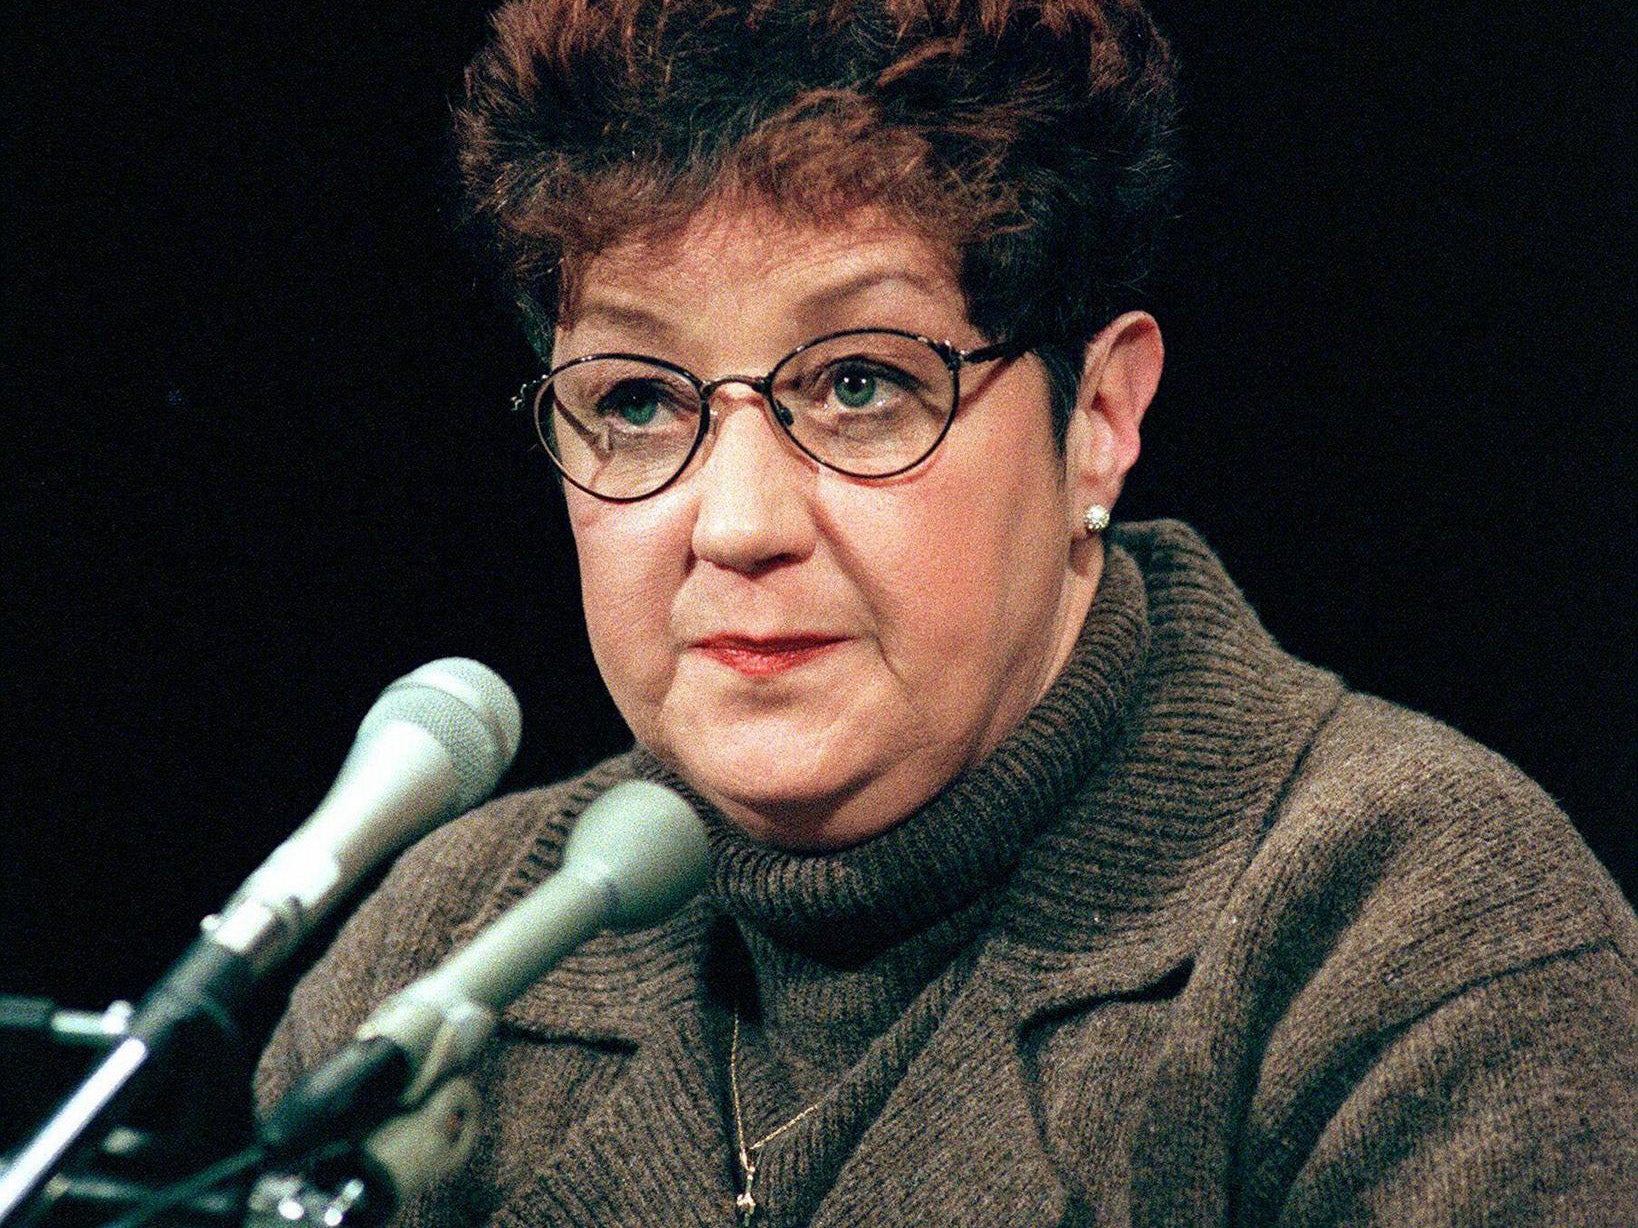 Norma McCorvey was known as Jane Roe when she took her battle for an abortion to the Supreme Court